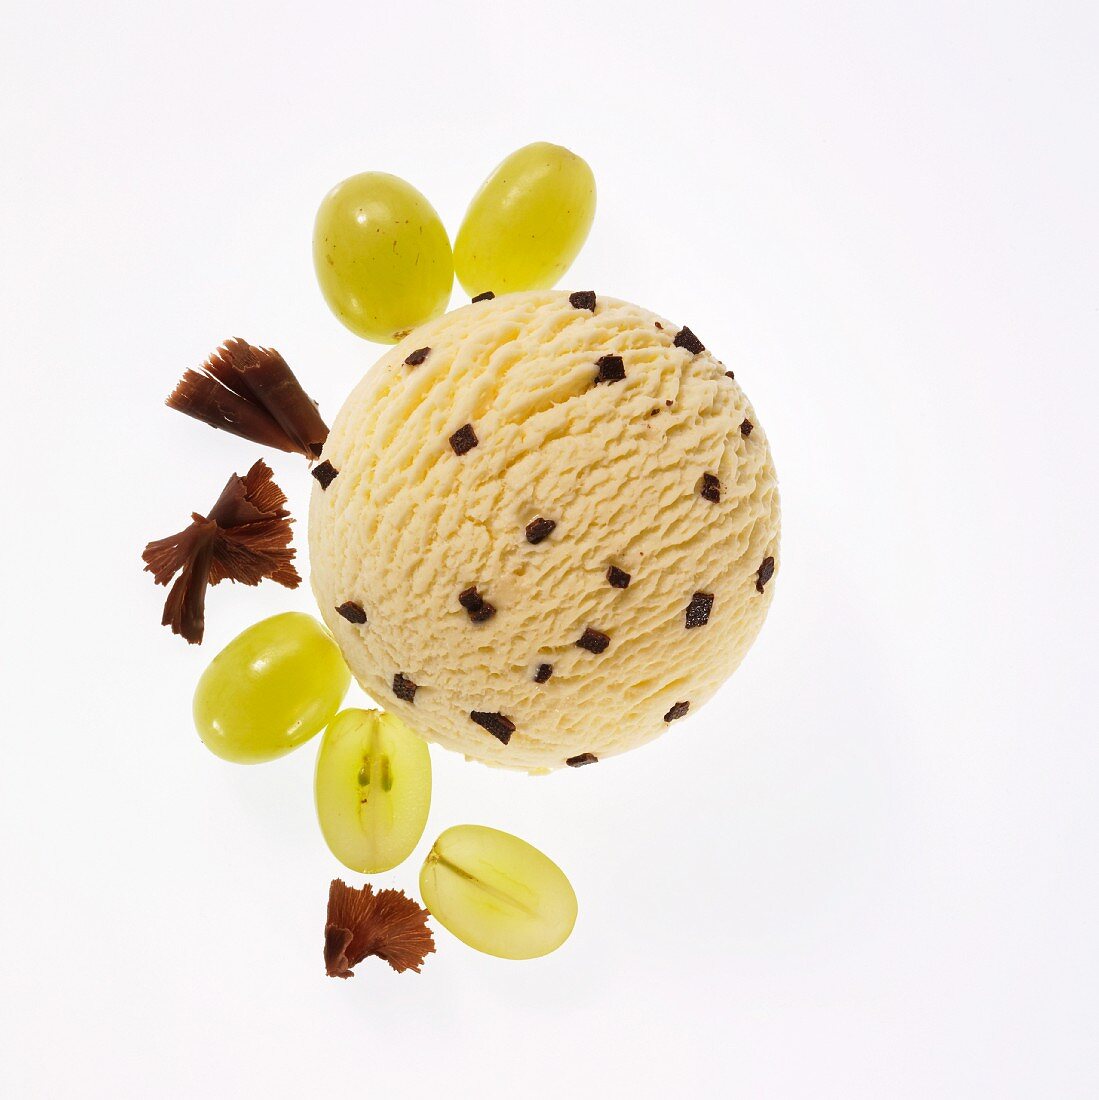 Wine foam ice cream with chocolate pieces, green grapes and grated chocolate